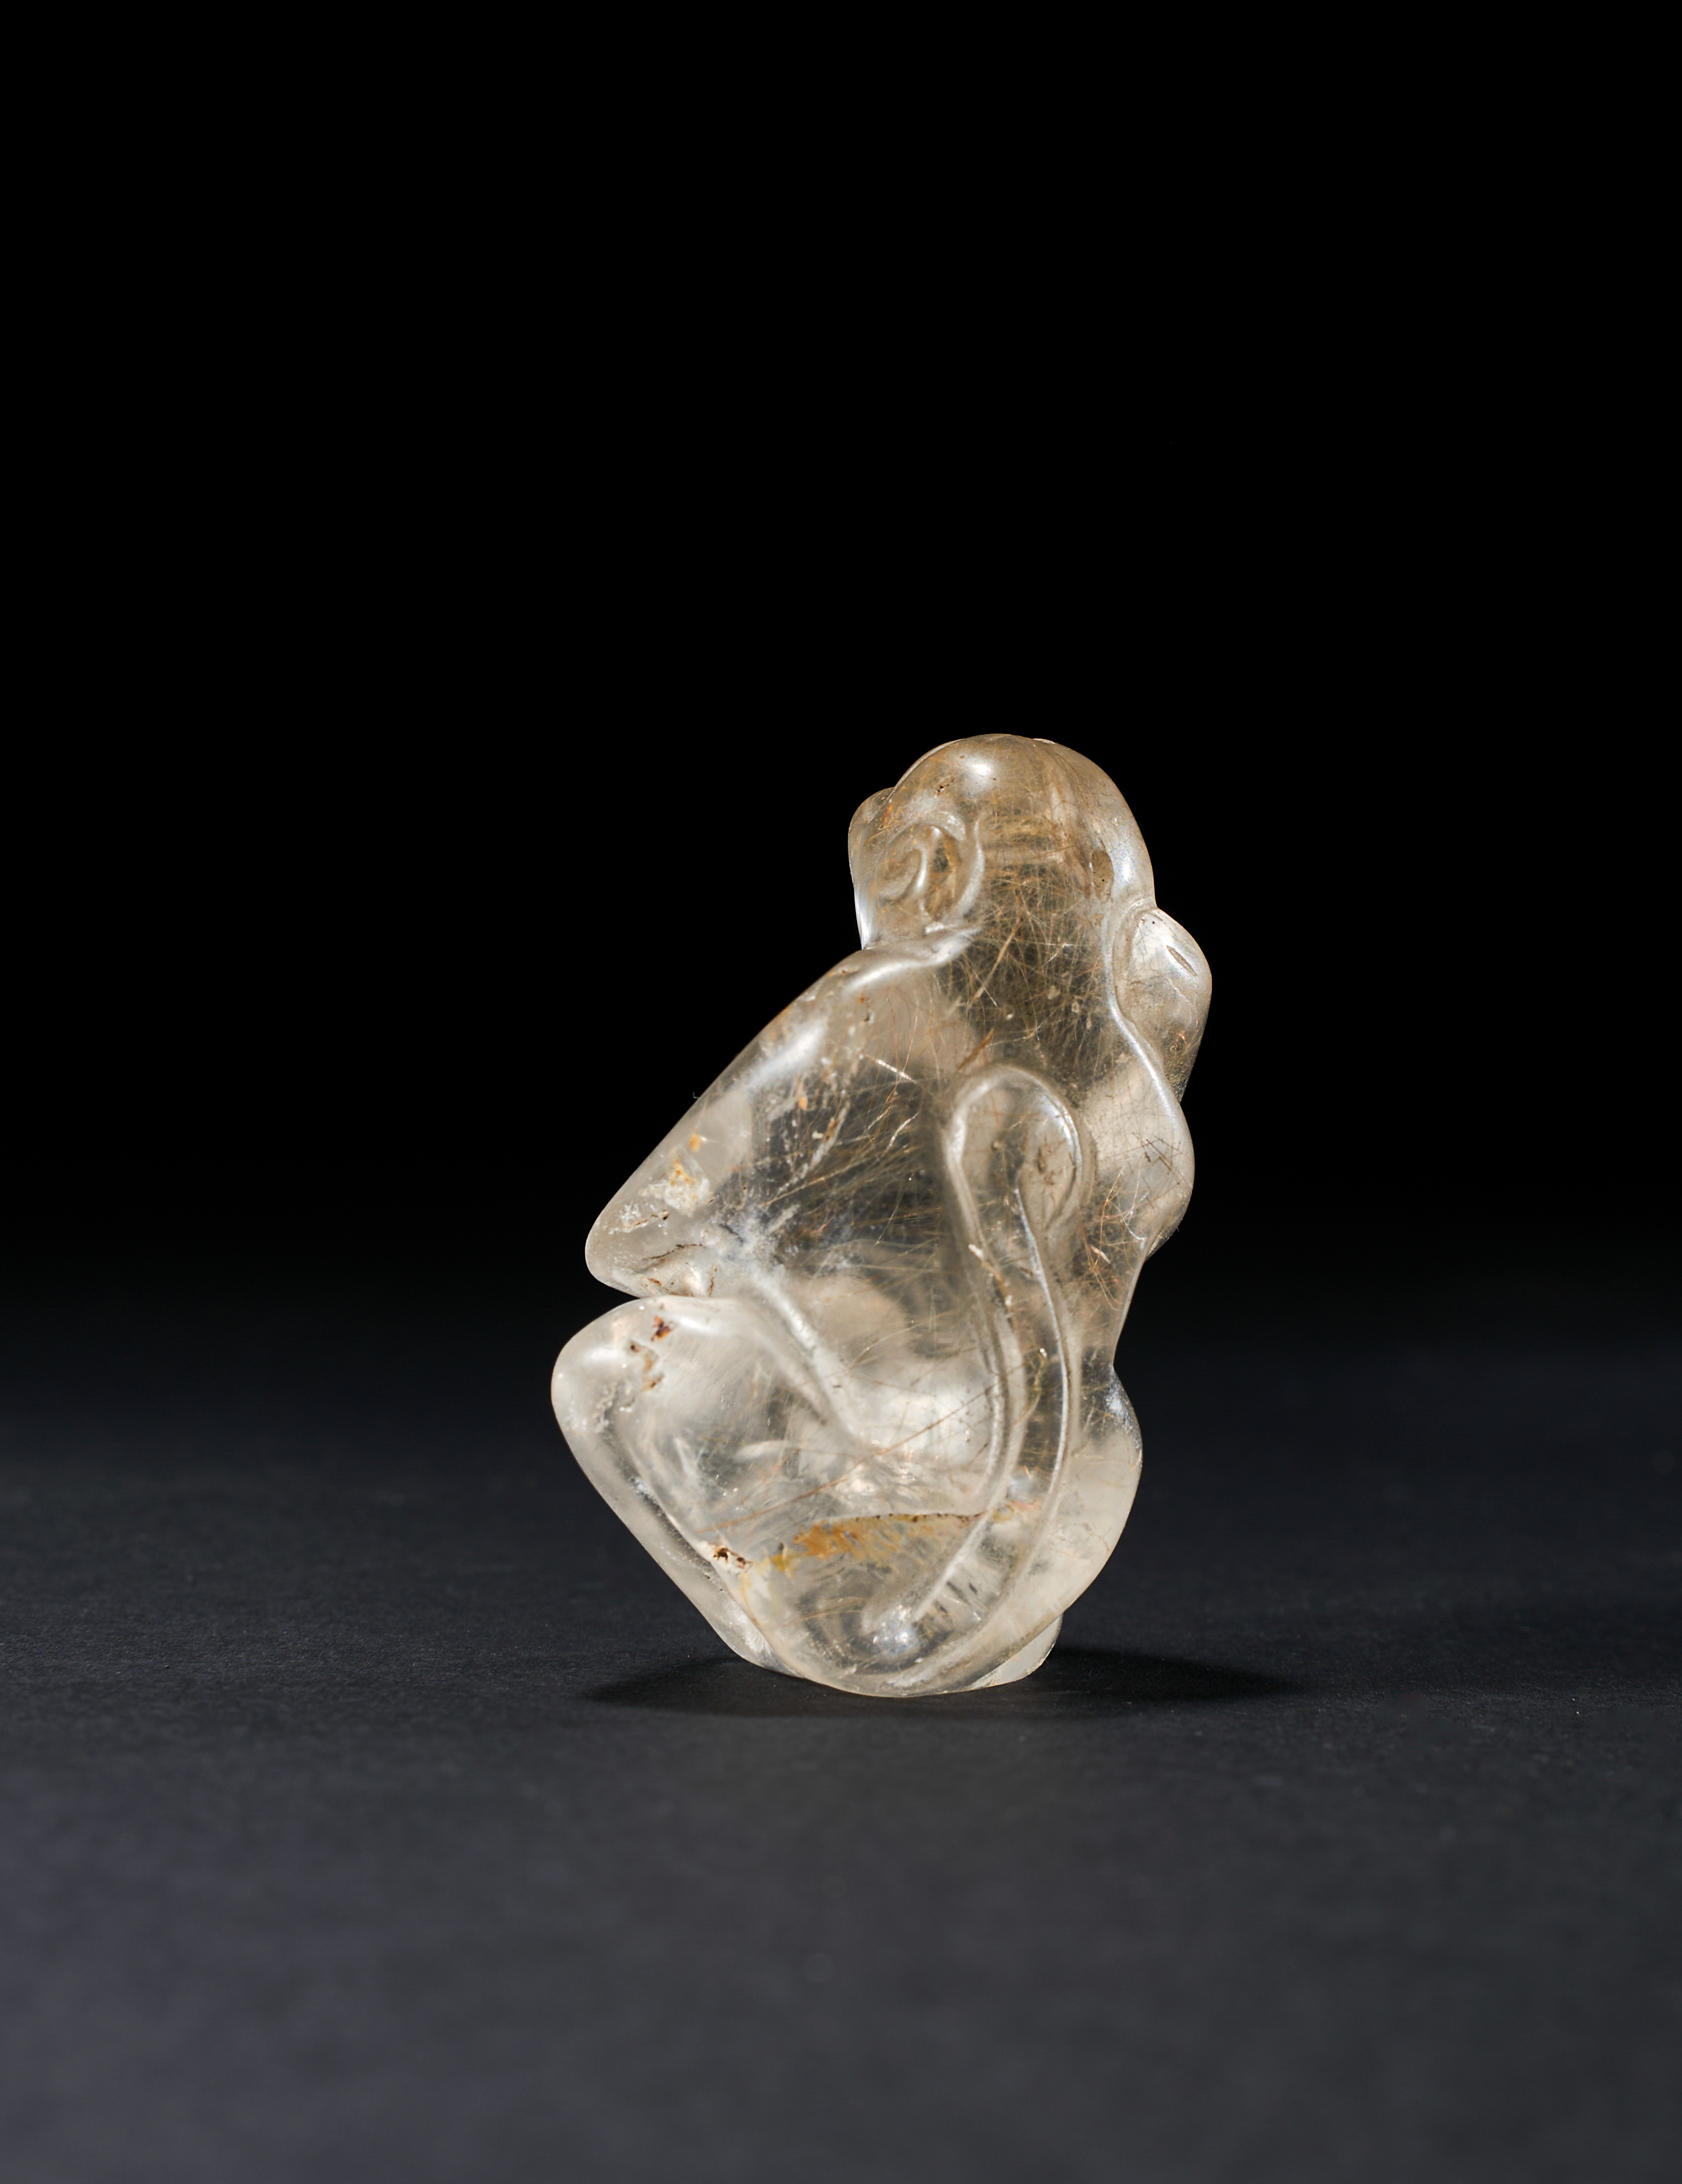 A BACTRIAN ROCK CRYSTAL FIGURE OF A SEATED MONKEY, CIRCA 2ND MILLENNIUM B.C. - Image 2 of 2